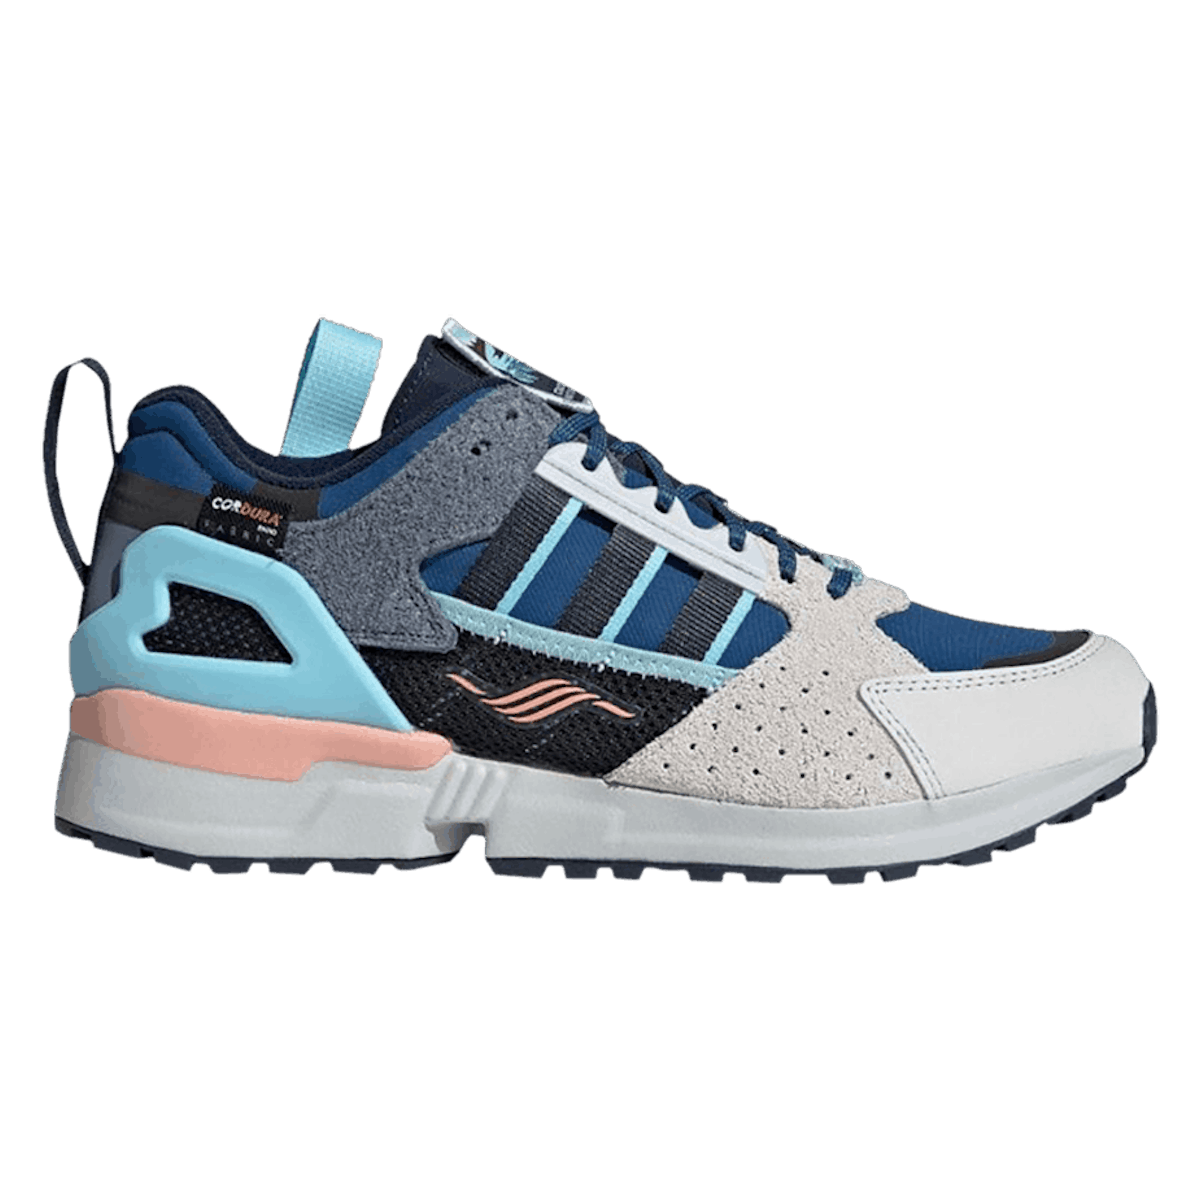 National Park Foundation x Adidas ZX 10.000 C "Crater Lake"